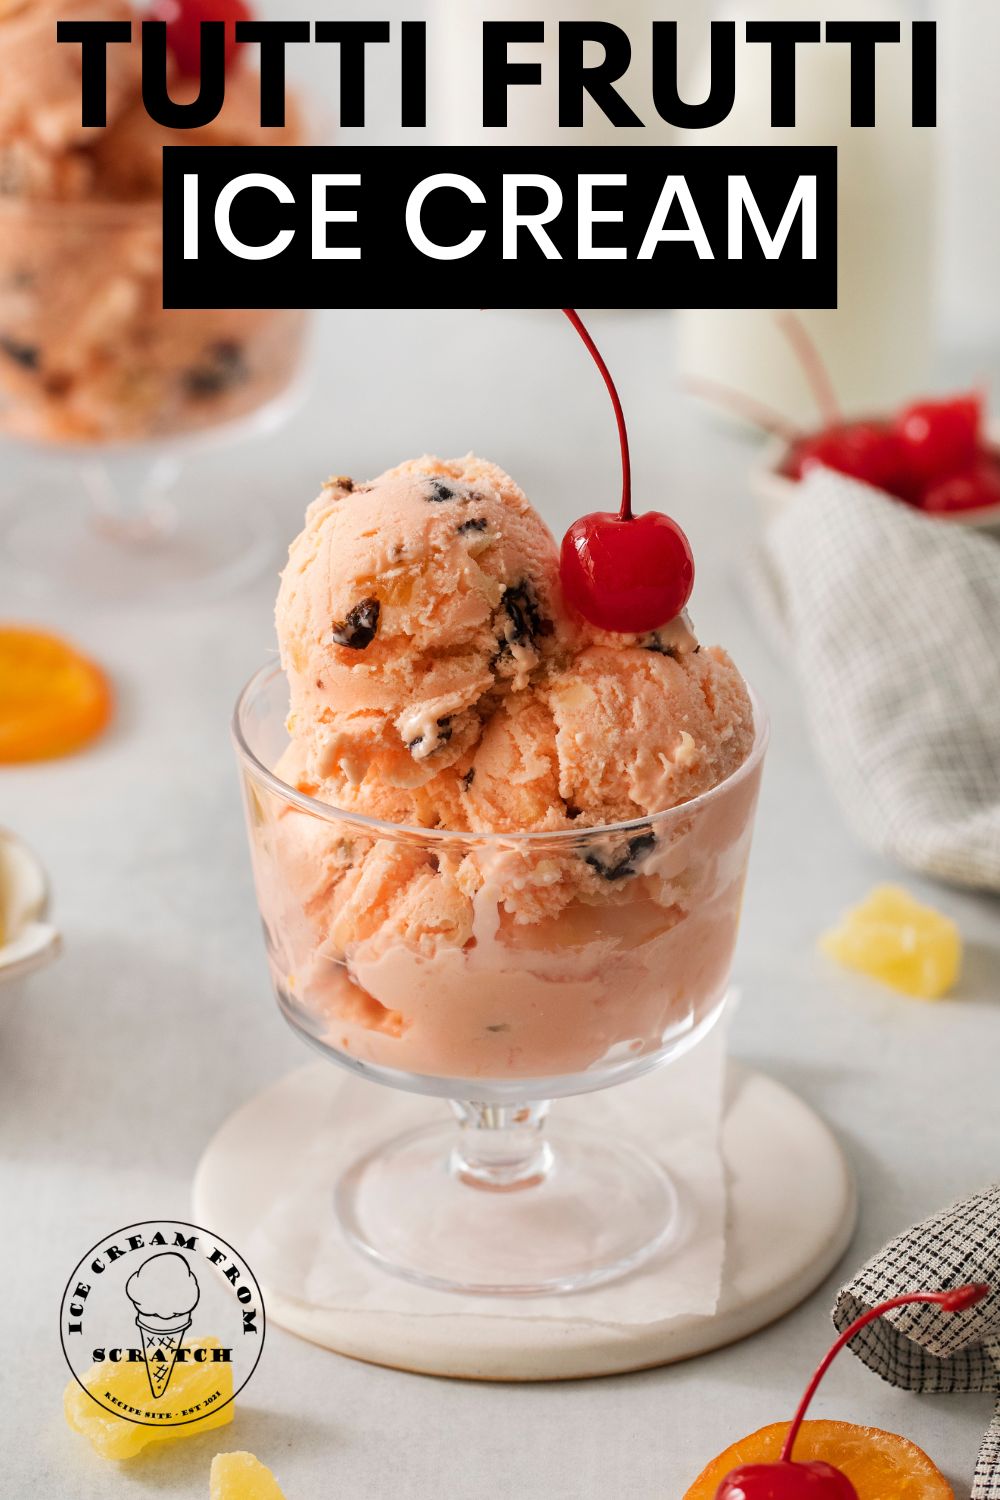 a dessert dish filled with scoops of tutti frutti ice cream with a cherry on top. Text overlay says Tutti Fruitti Ice Cream in black lettering at the top.